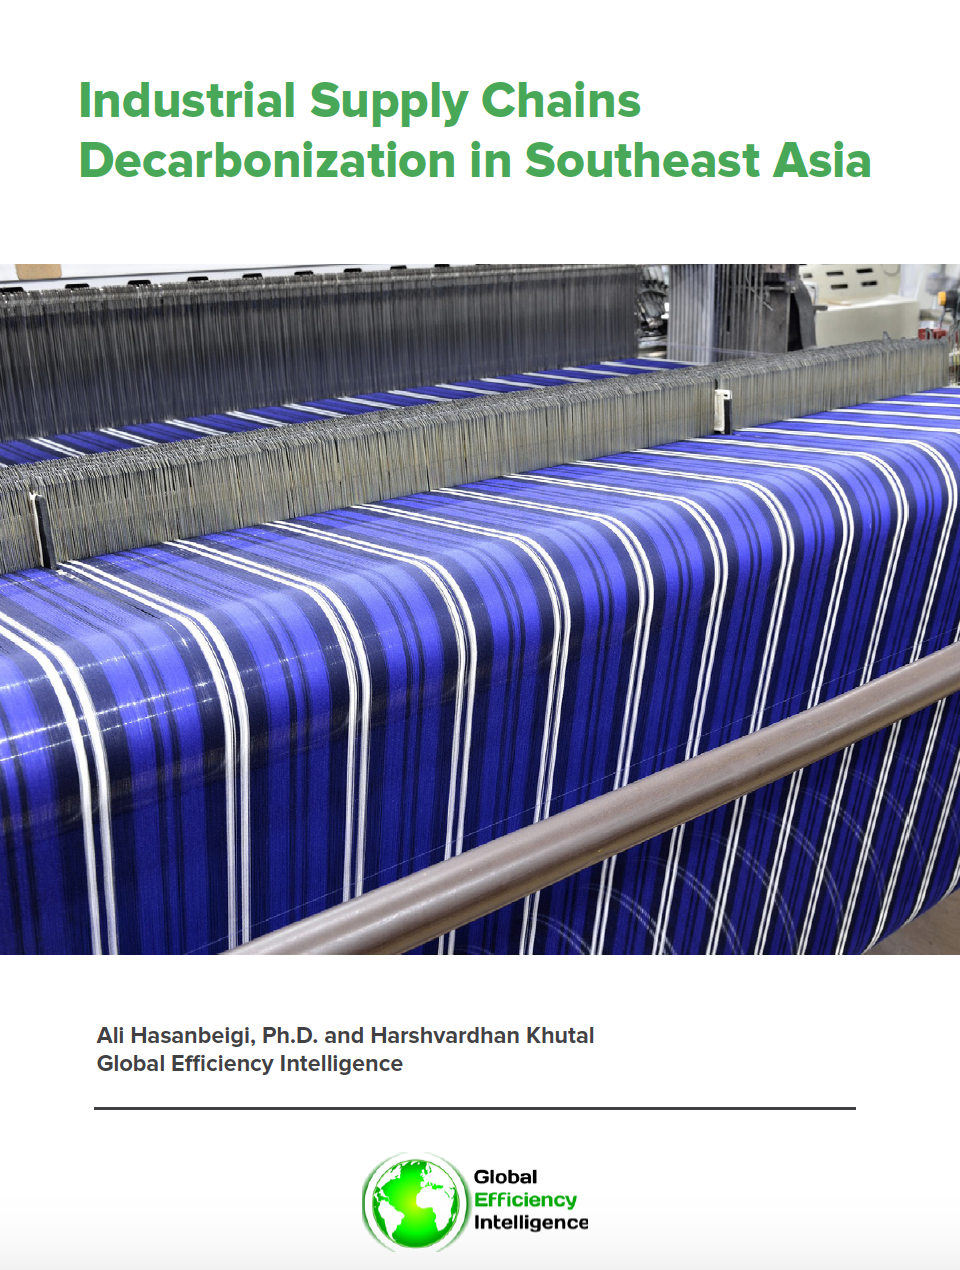 Supply chain decarbonization in Asia.png